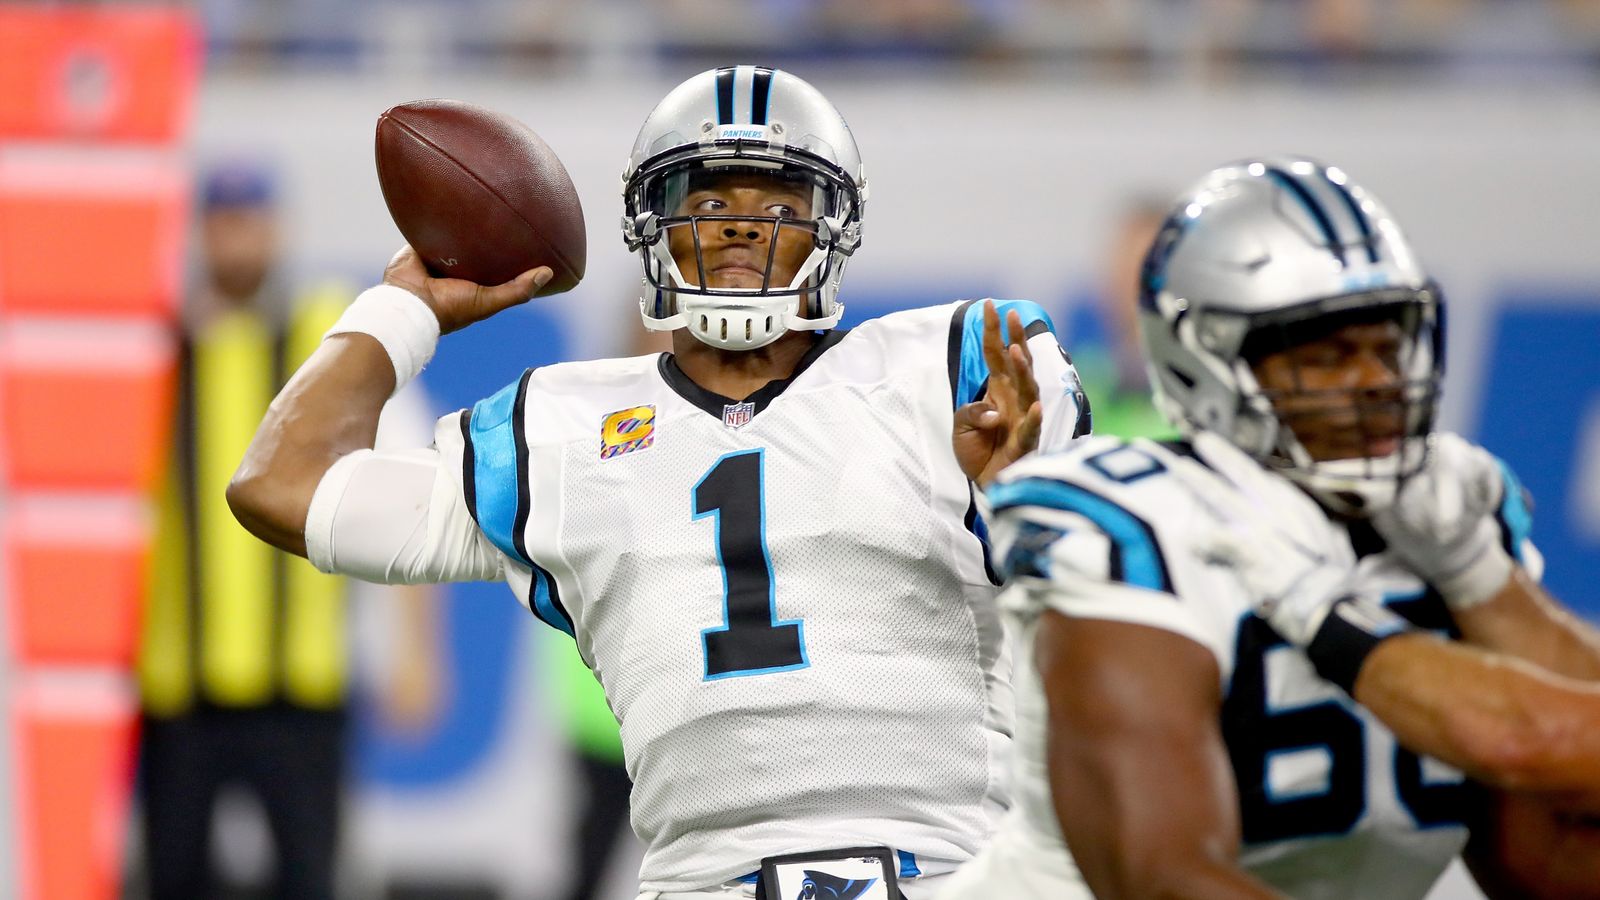 Carolina Panthers 27-24 Detroit Lions: Cam Newton throws three TDs in